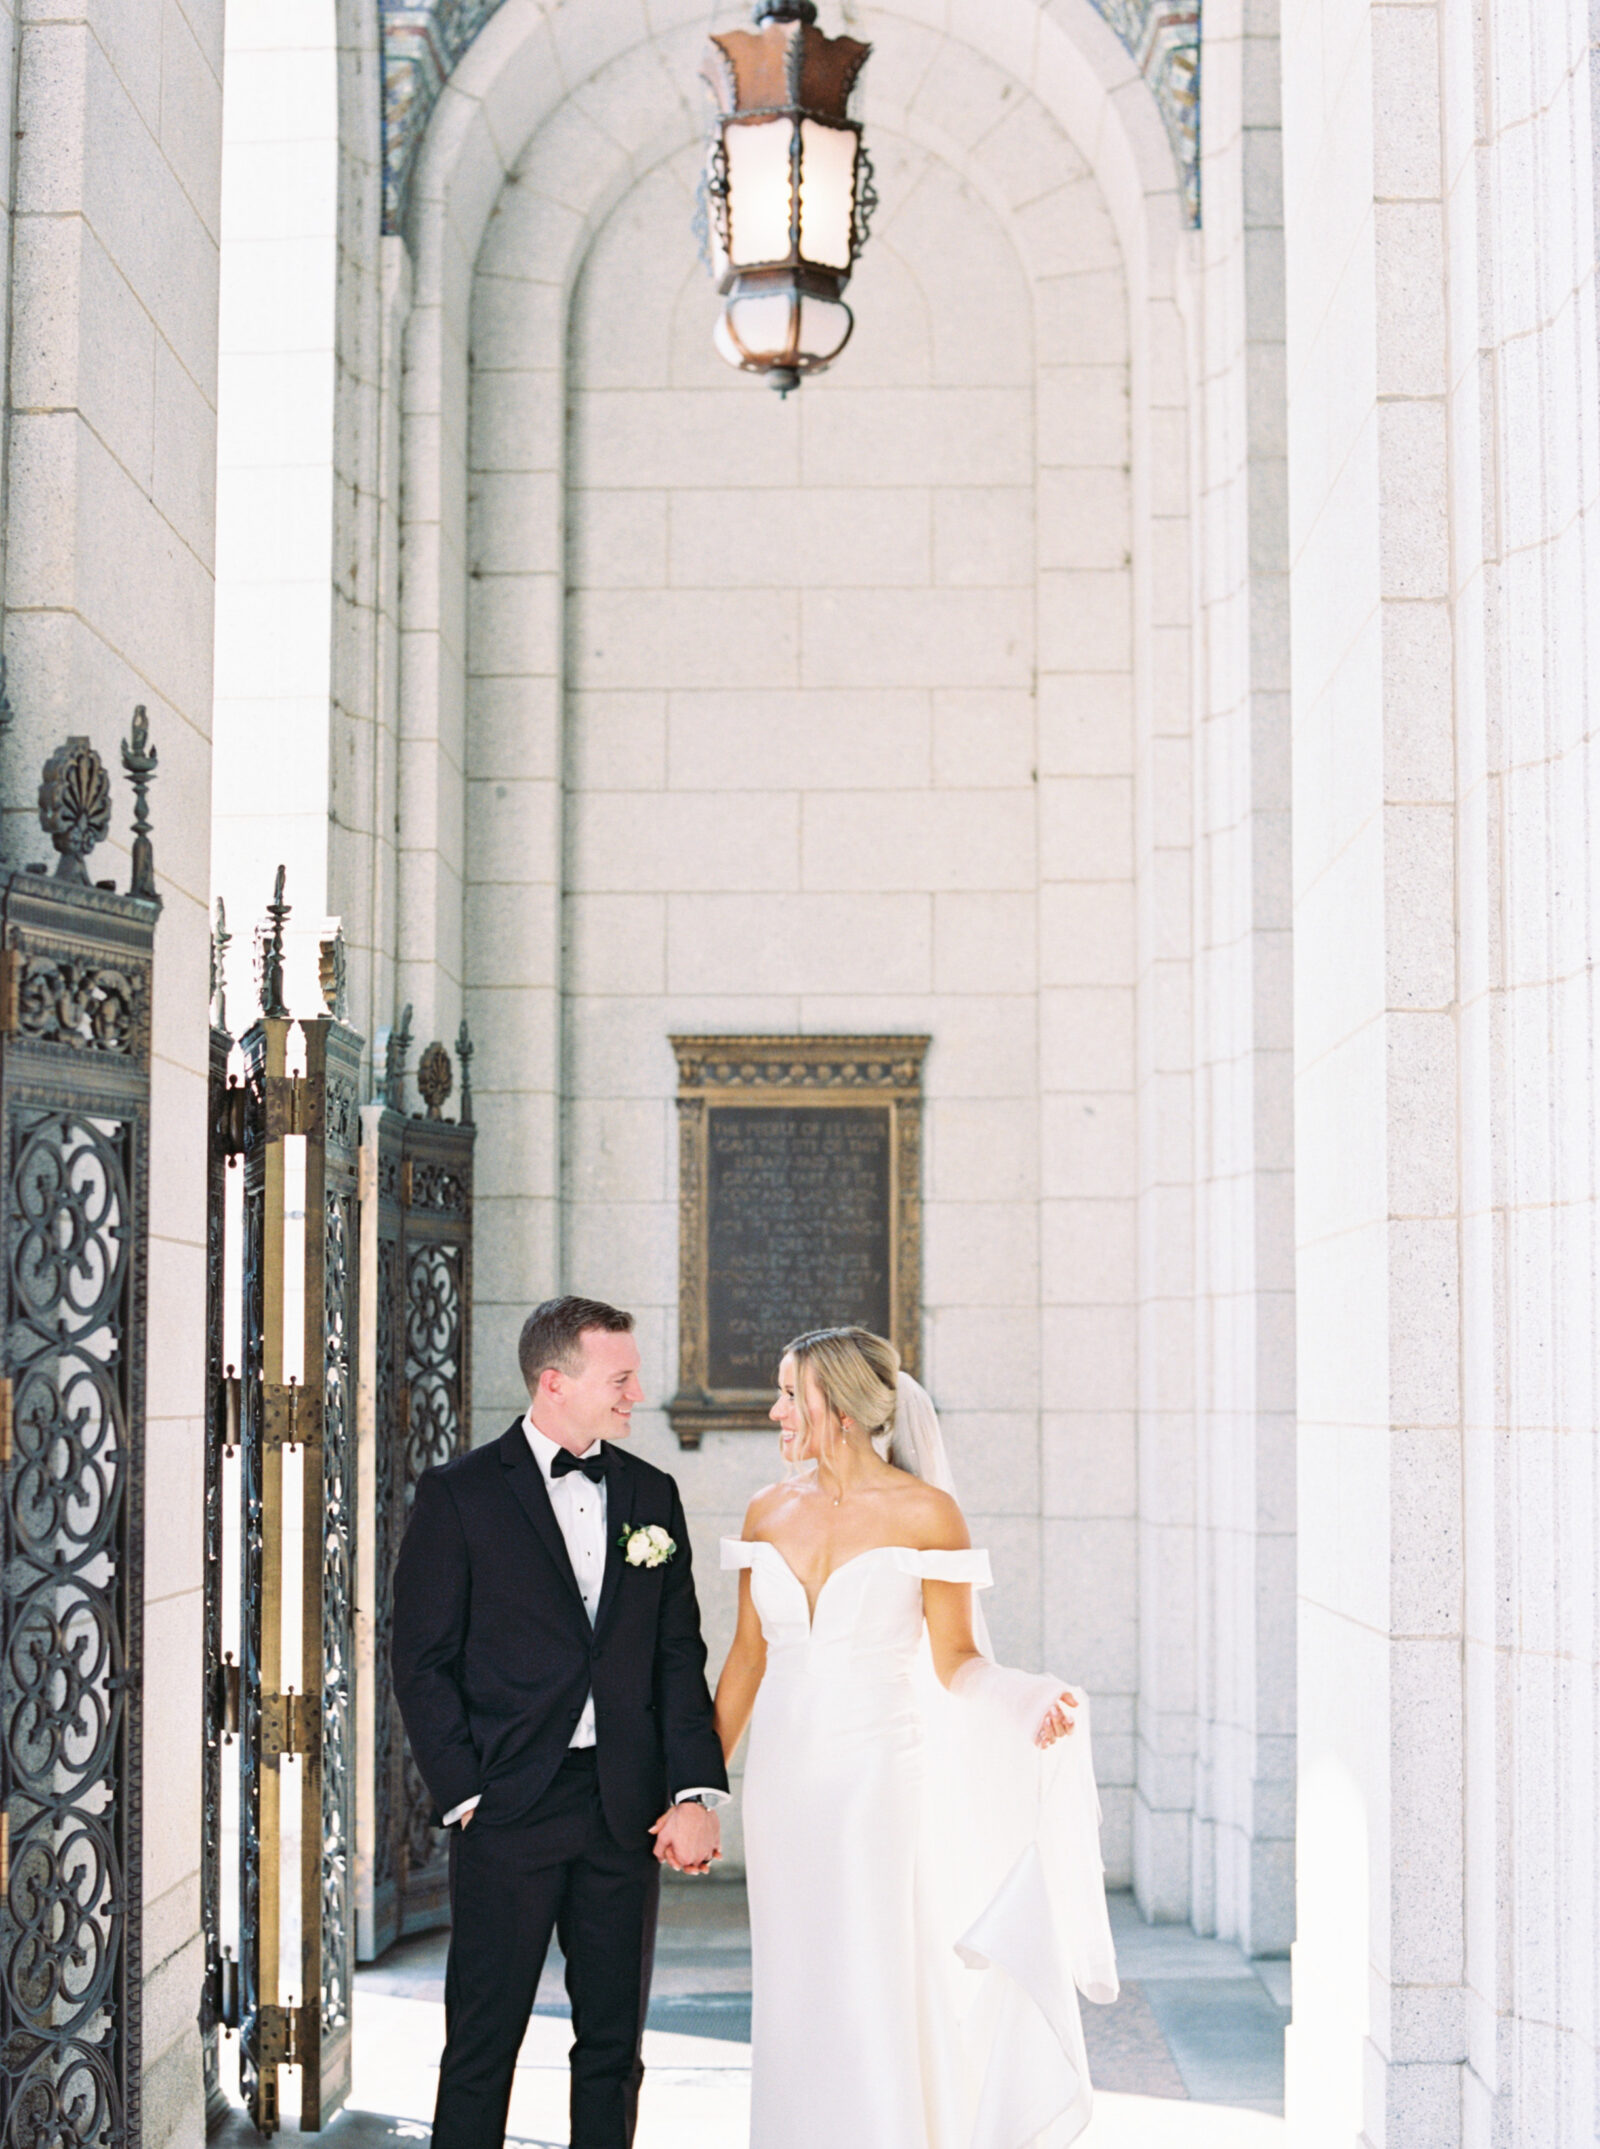 St Louis Central Library Wedding Day film photography